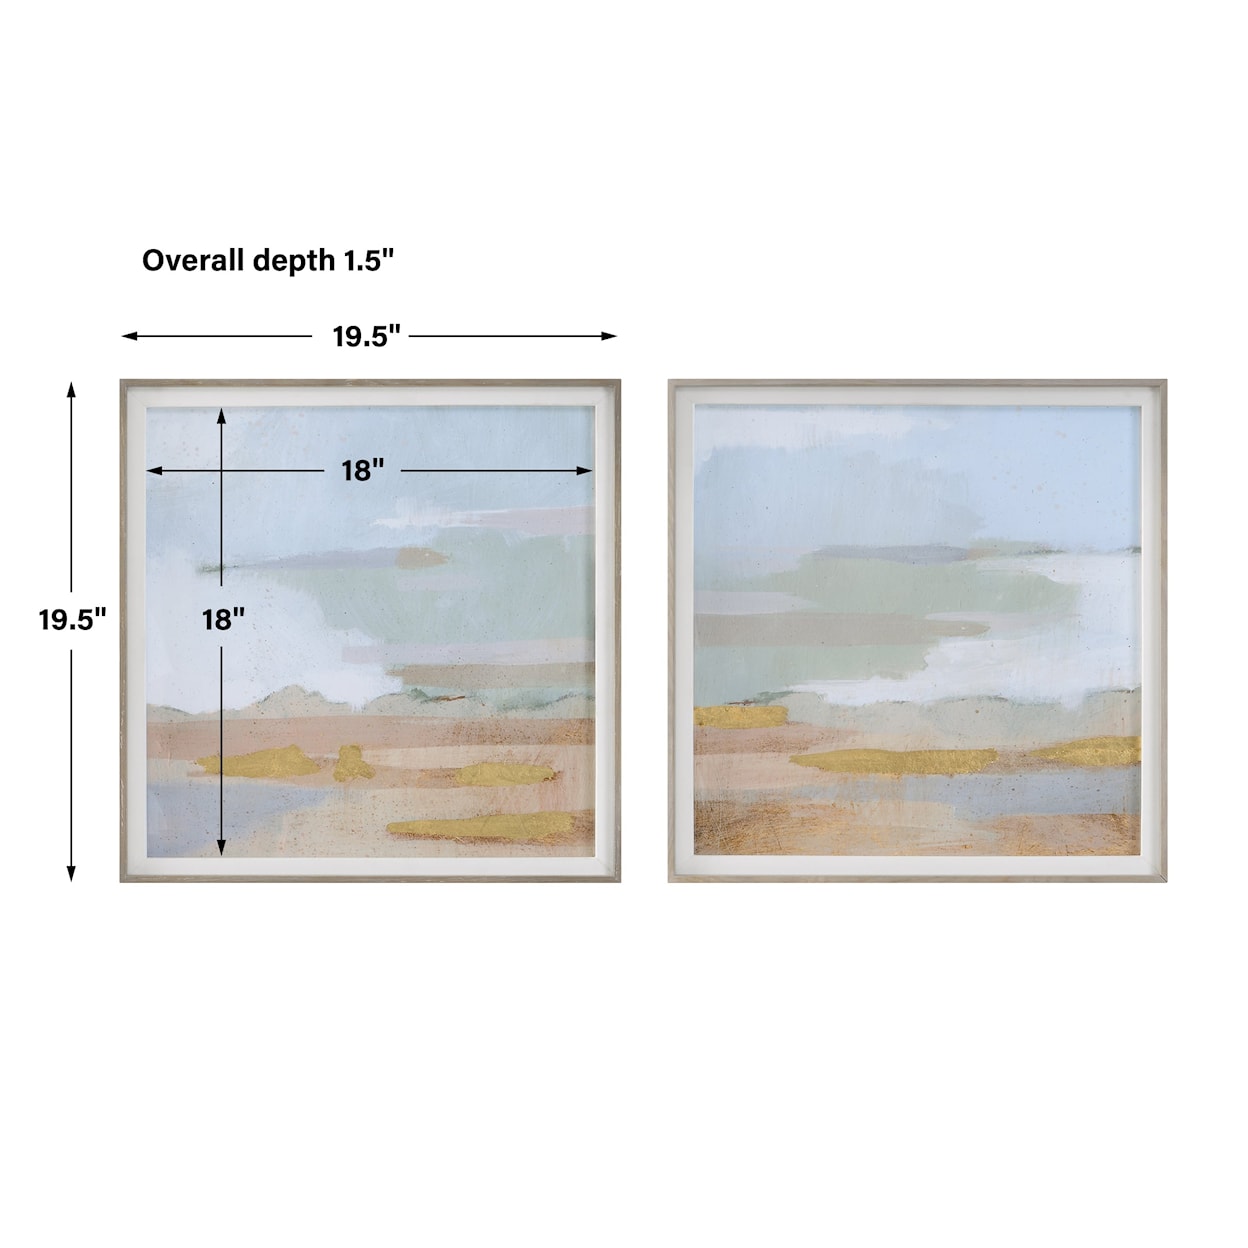 Uttermost Abstract Coastline Abstract Coastline Framed Prints S/2